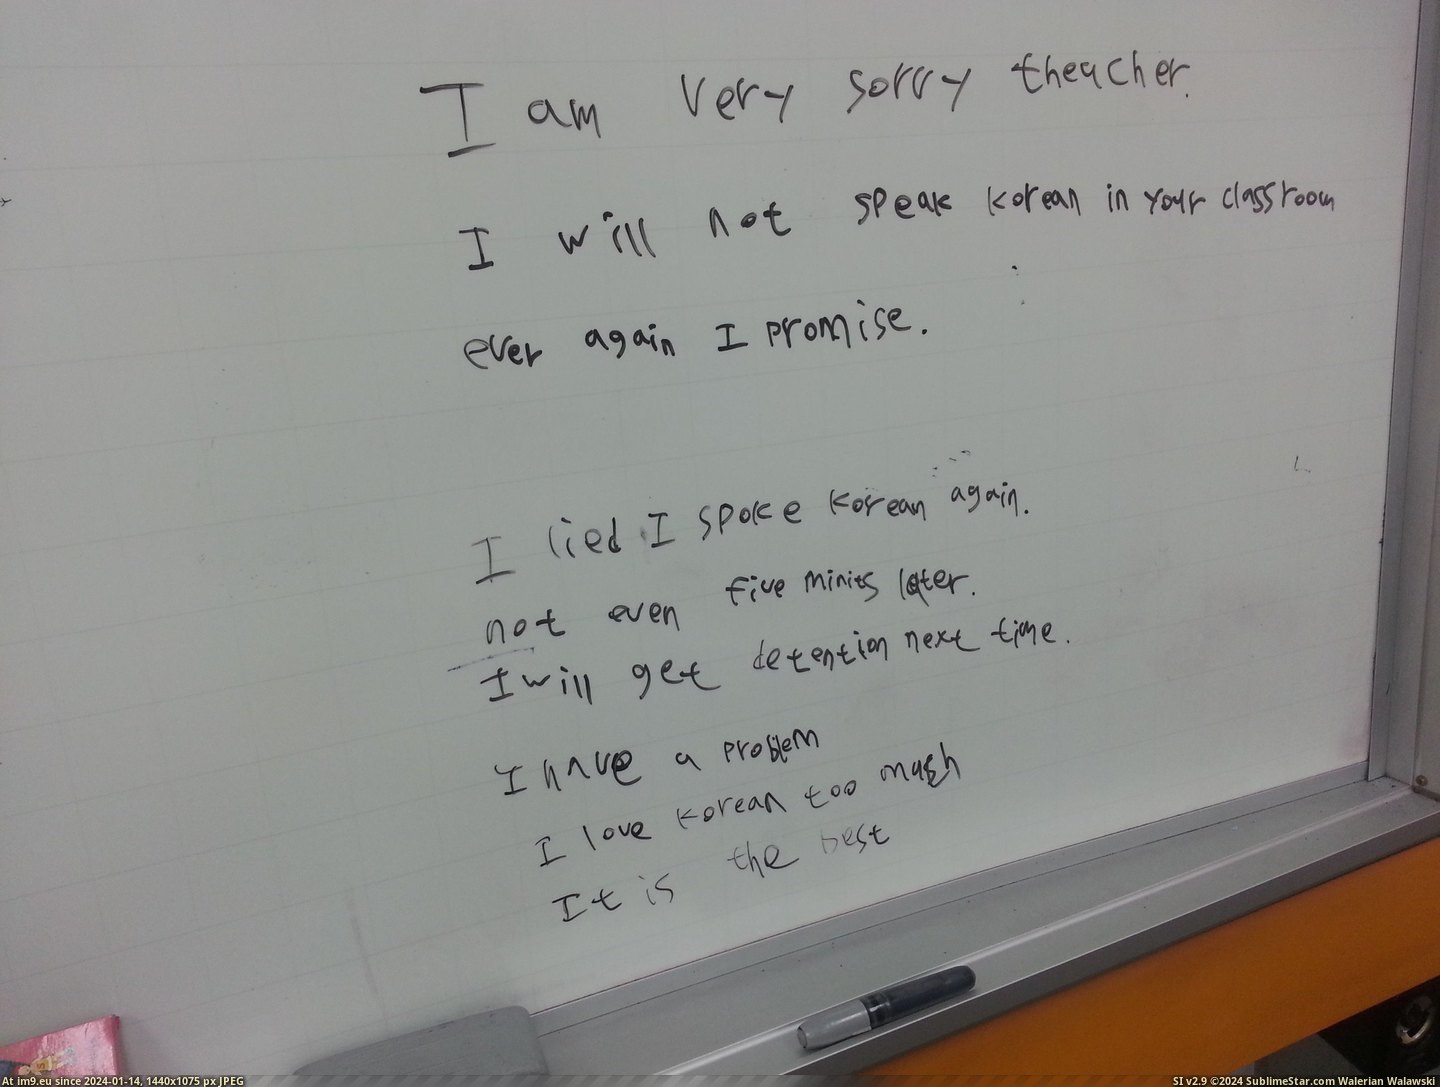 #Funny #Was #Work #School #Stopped #Speaking #Whiteboard #Kids #Class #English #Korean [Funny] I work at a Korean English school where we recently stopped kids from speaking Korean in class. This was my whiteboard t Pic. (Изображение из альбом My r/FUNNY favs))